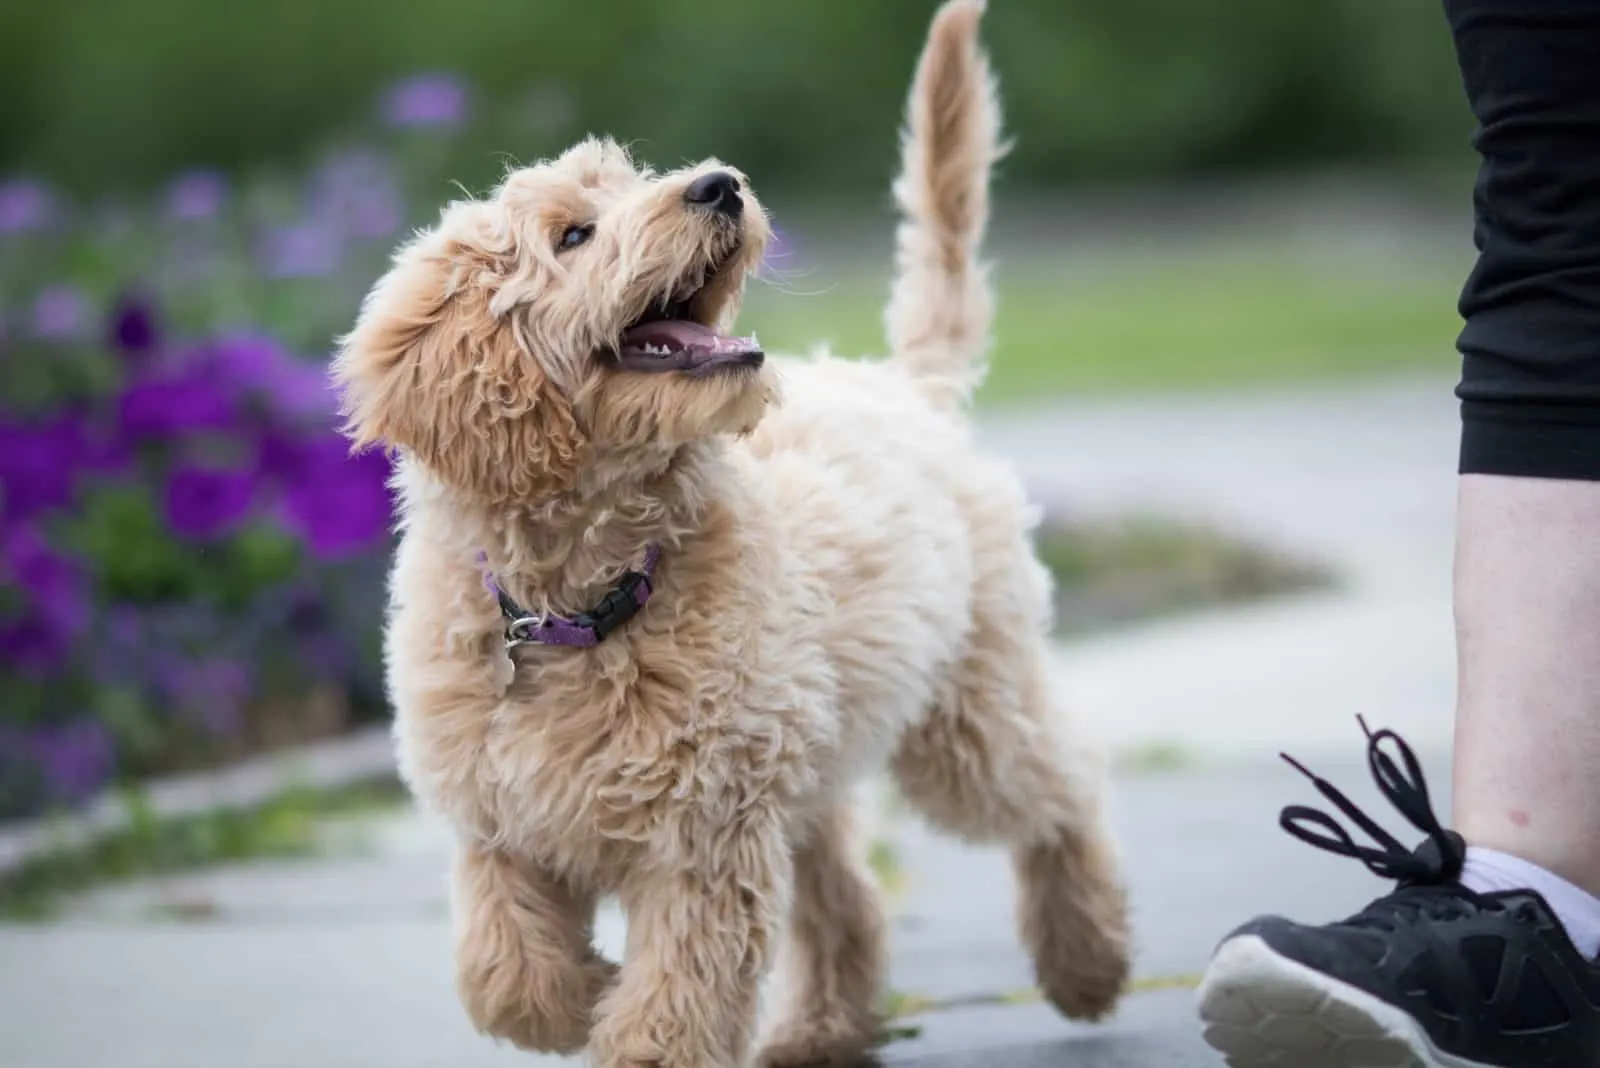 the labradoodle walks with the owner and watches her